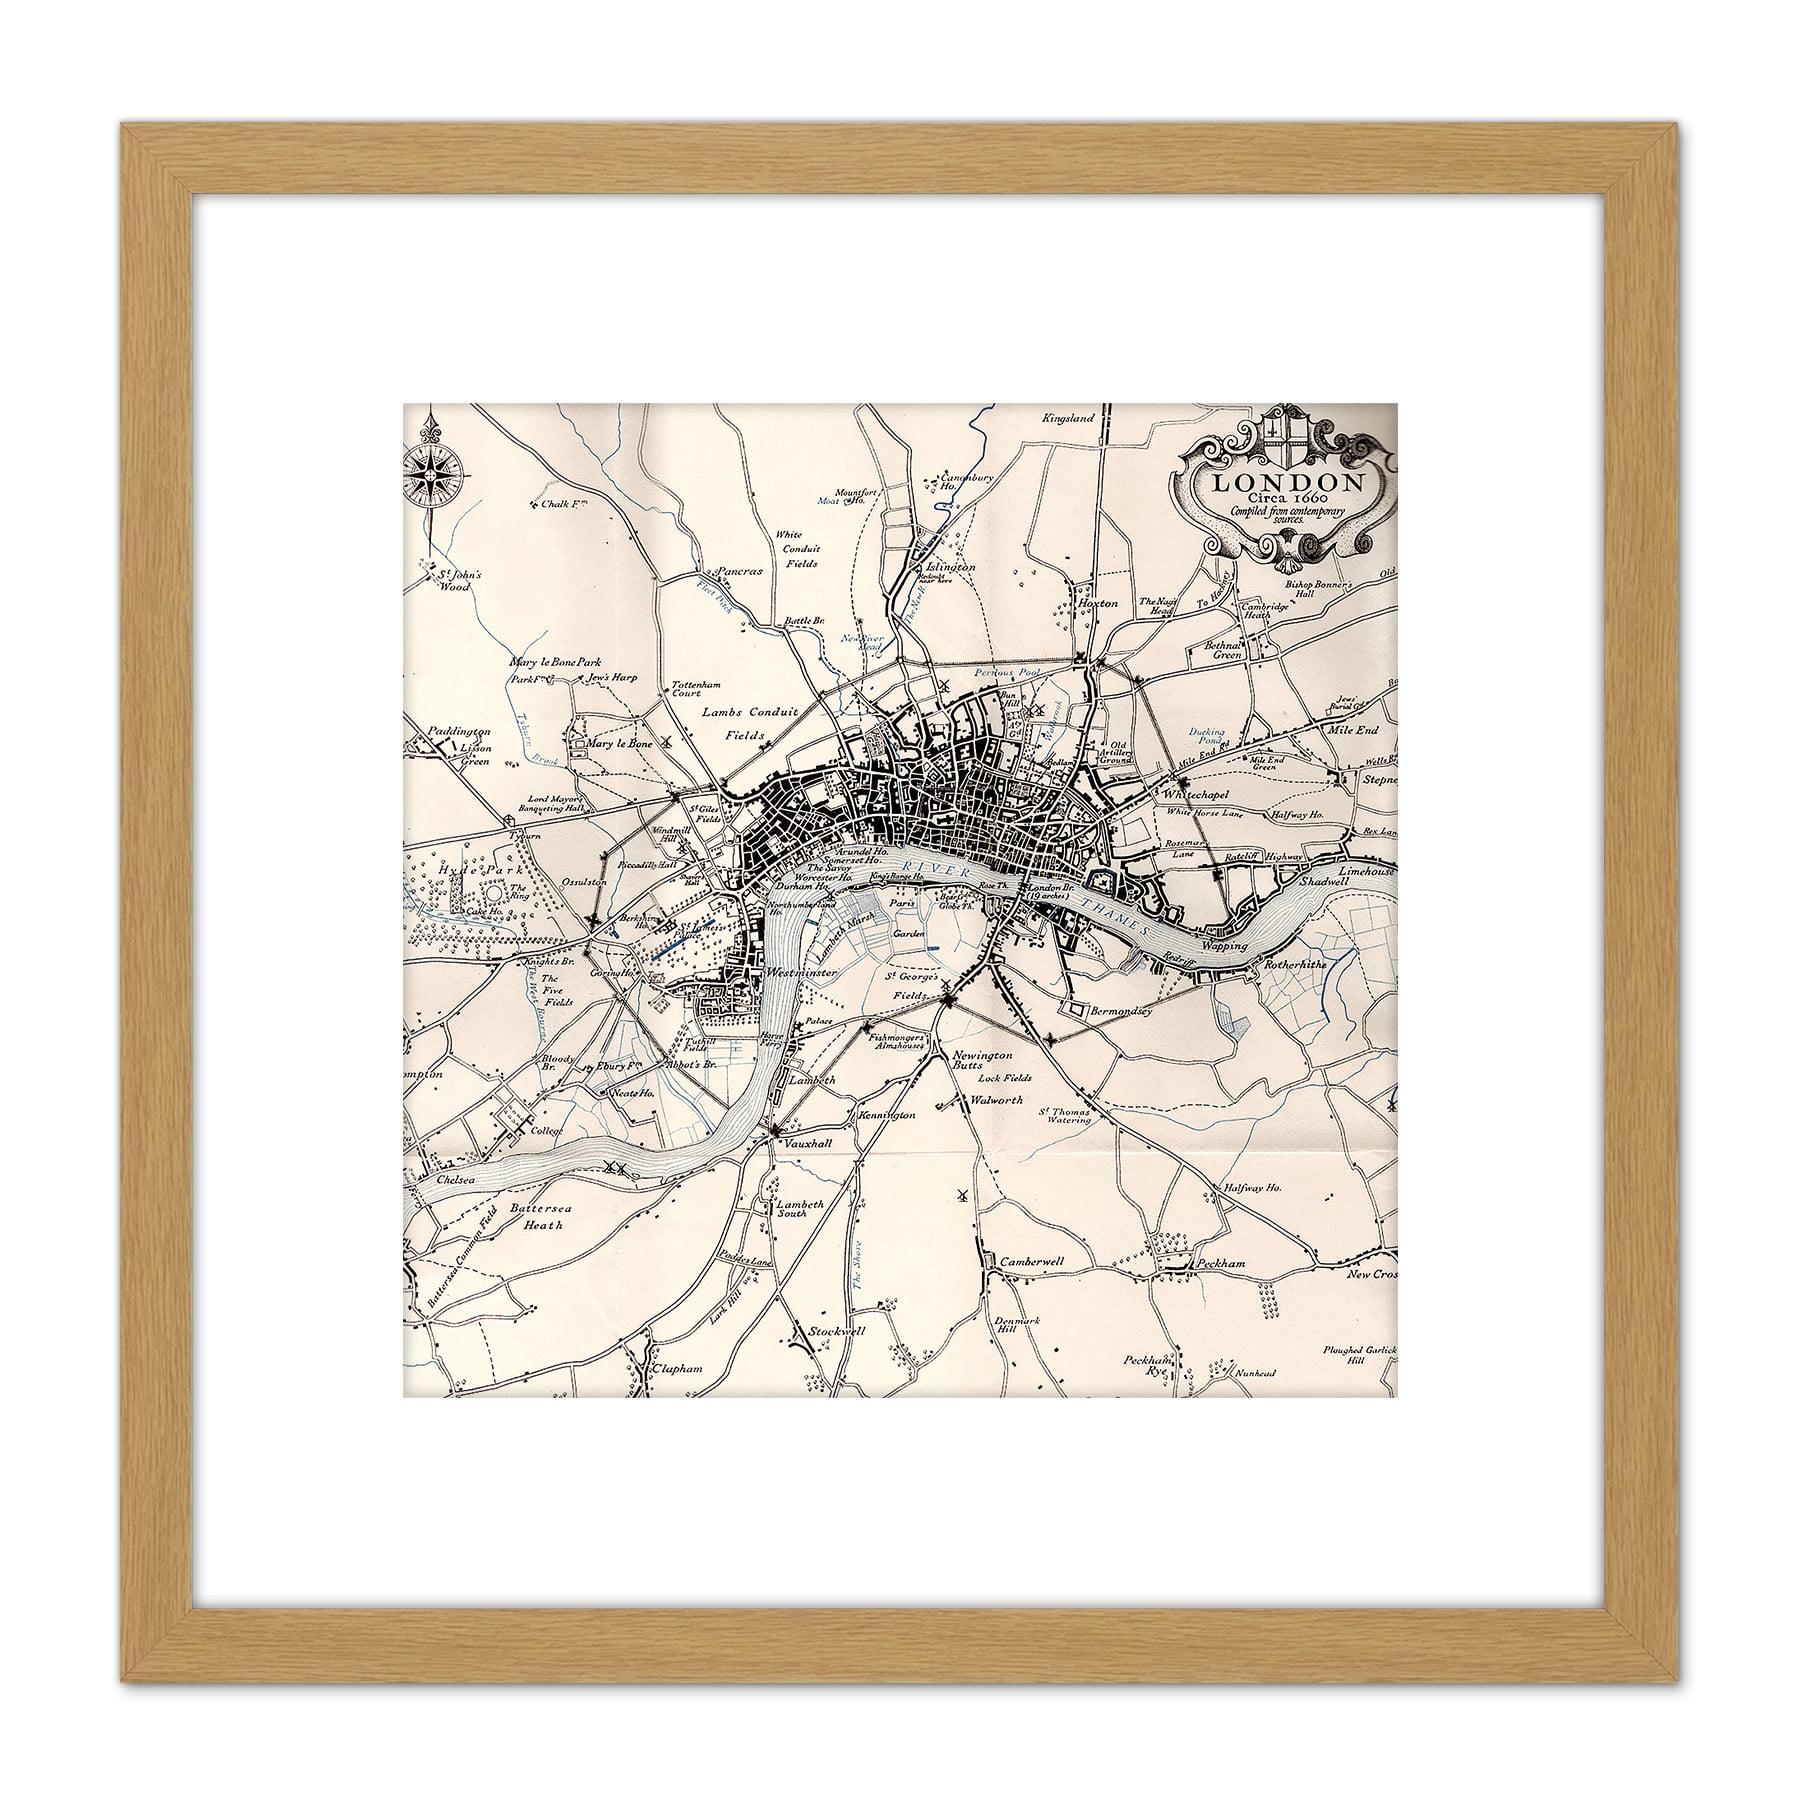 Wooden Art London Picture England City 1930 1660 Map Mount Print with Plan Crown Framed Wall Inch Square 8X8 Chart